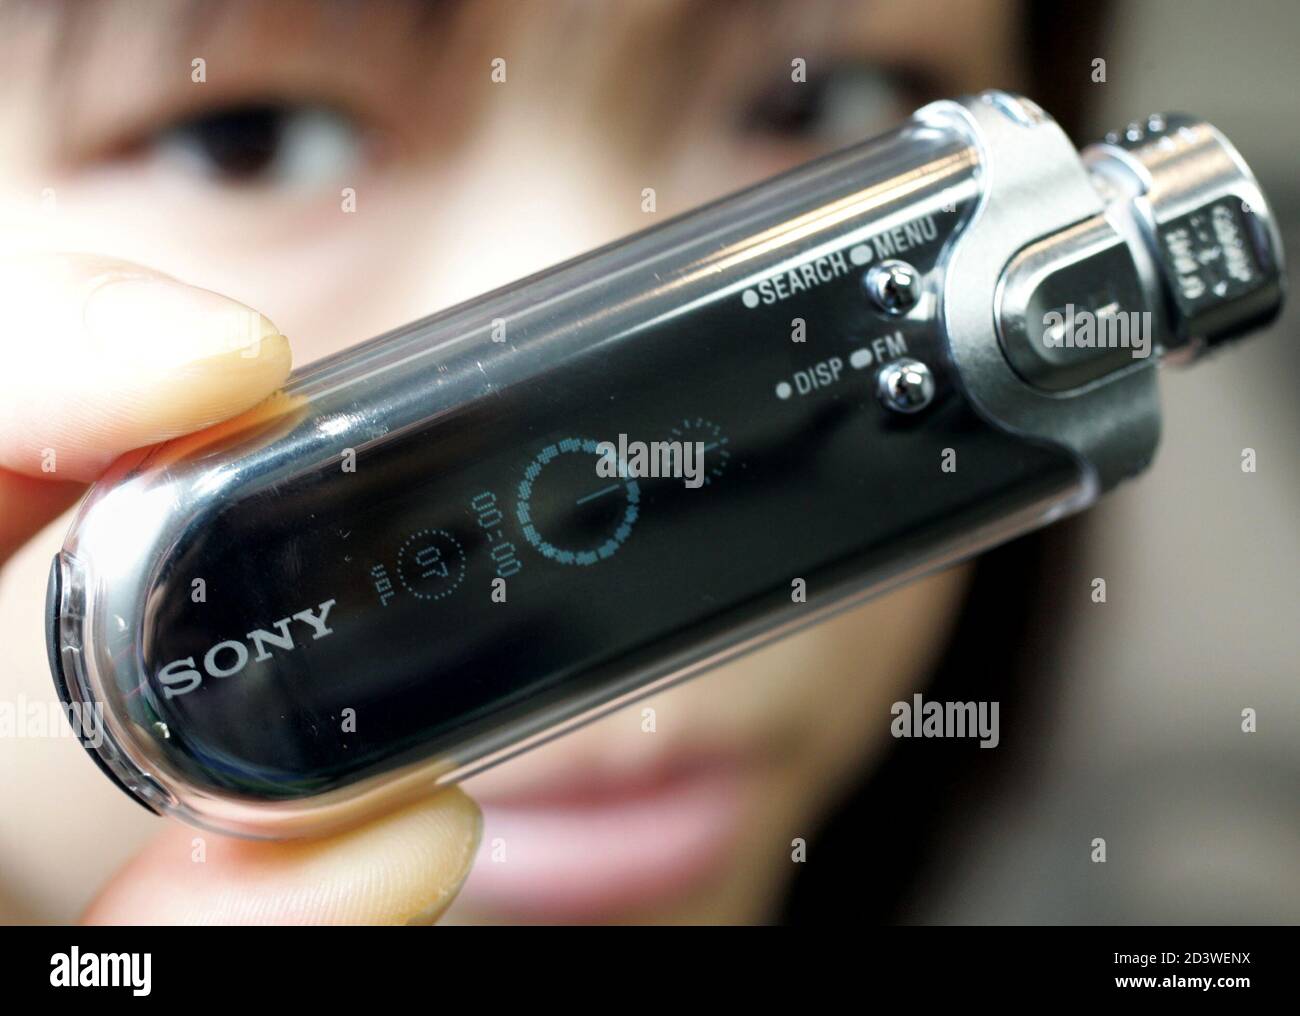 A woman holds Sony Corp's new Walkman portable music player NW-E507 in  Tokyo March 9, 2005. The new flash memory player is equipped with an  organic electro-luminescence (OLED) display and is capable